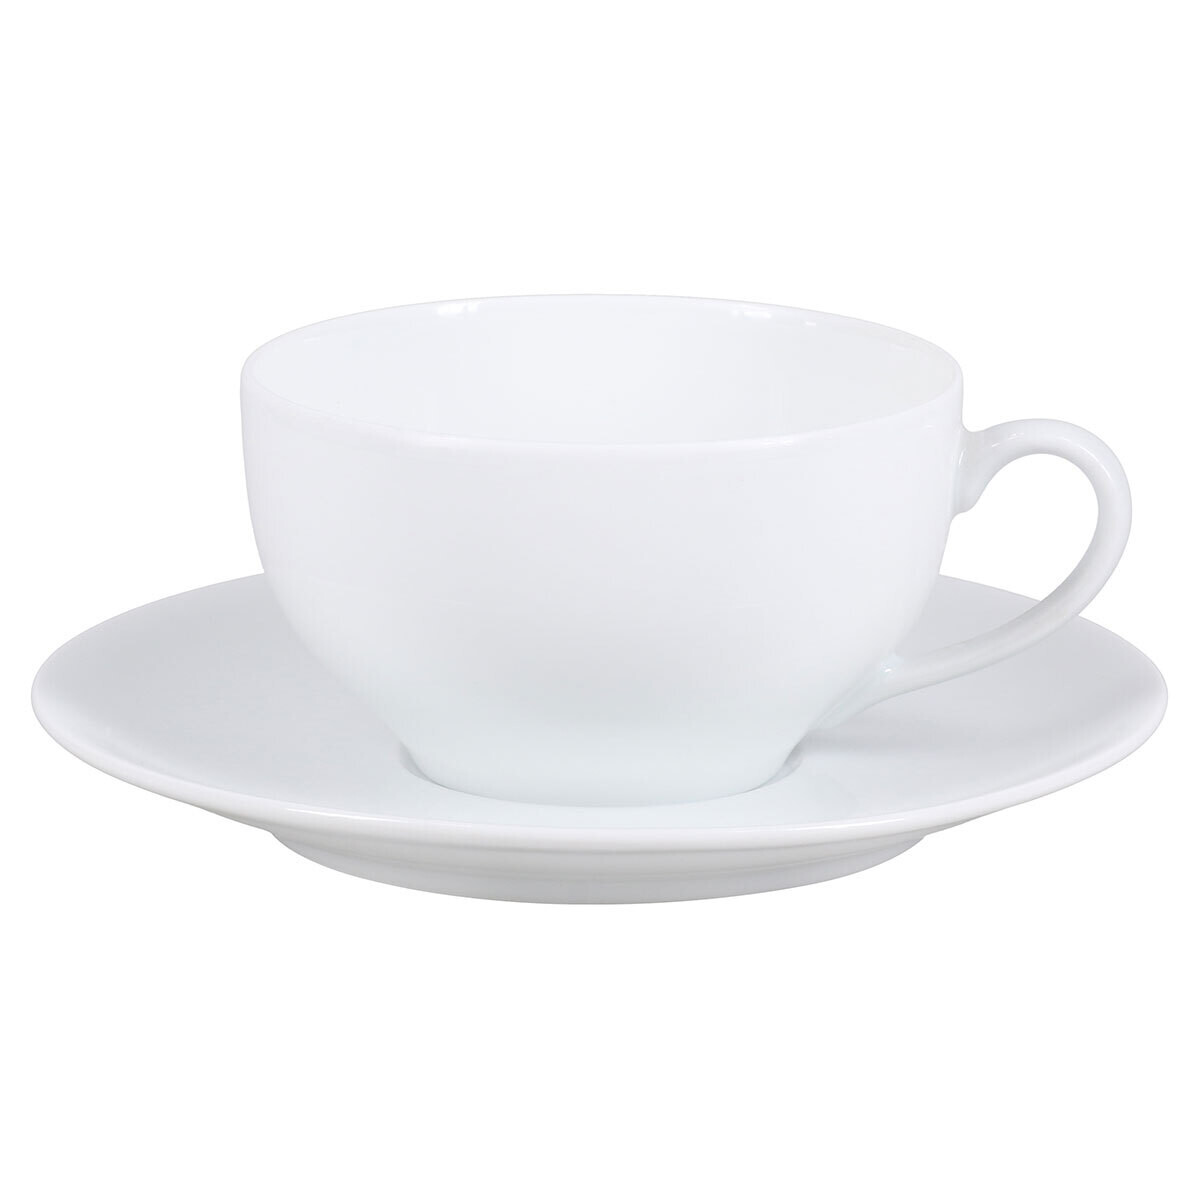 Royal Limoges Coupe White Vienna Tea Cup R300-VIE00001